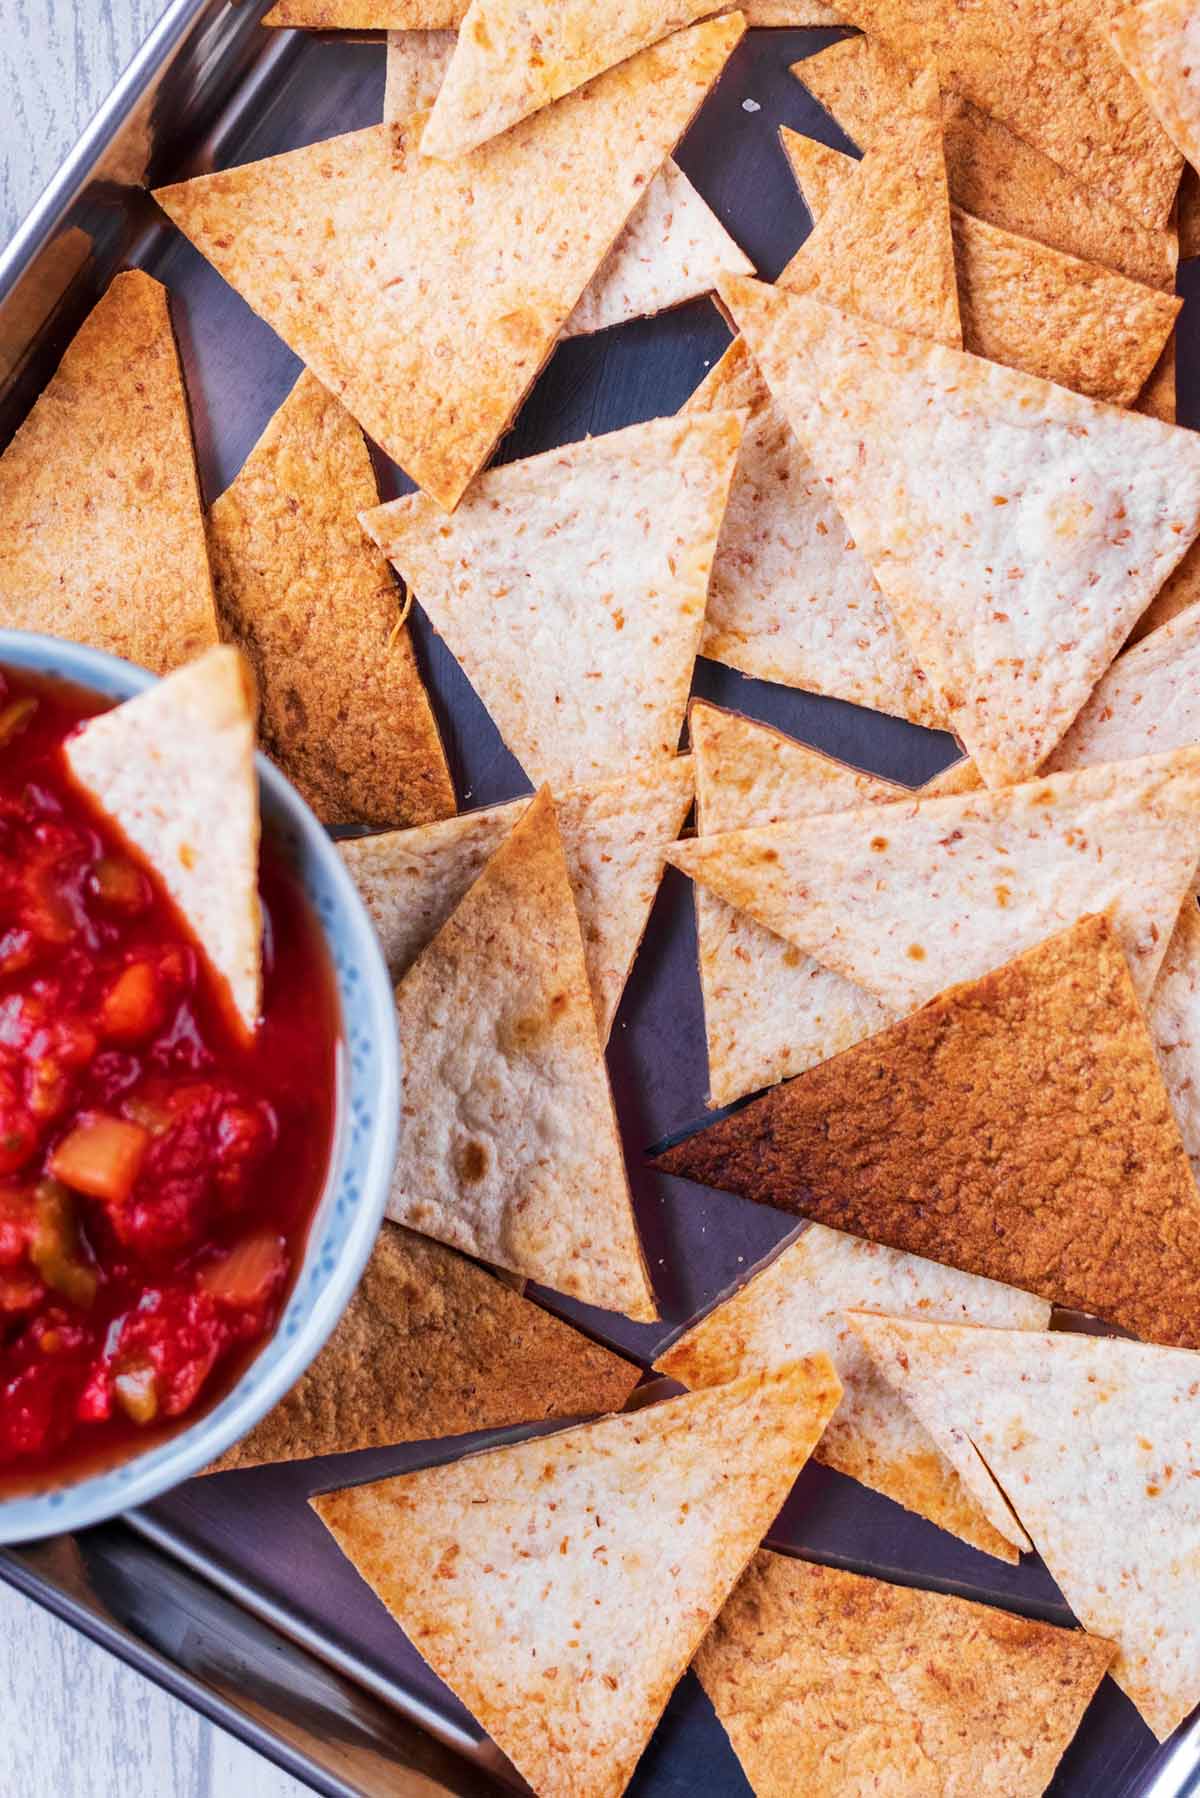 Tortilla chips next to a bowl of tomato salsa.